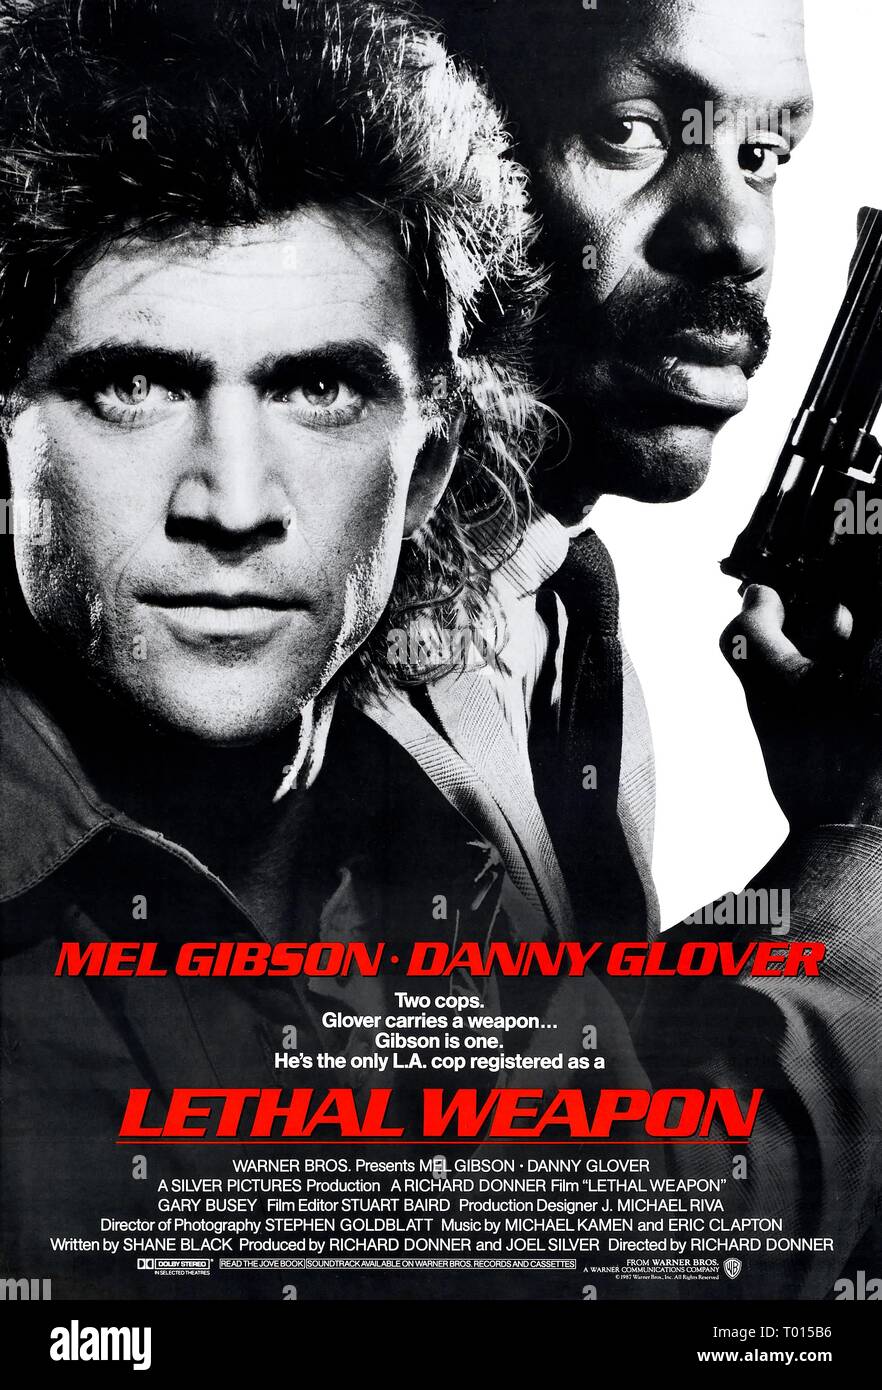 MEL GIBSON, Danny Glover, Plakat, Lethal Weapon, 1987 Stockfoto